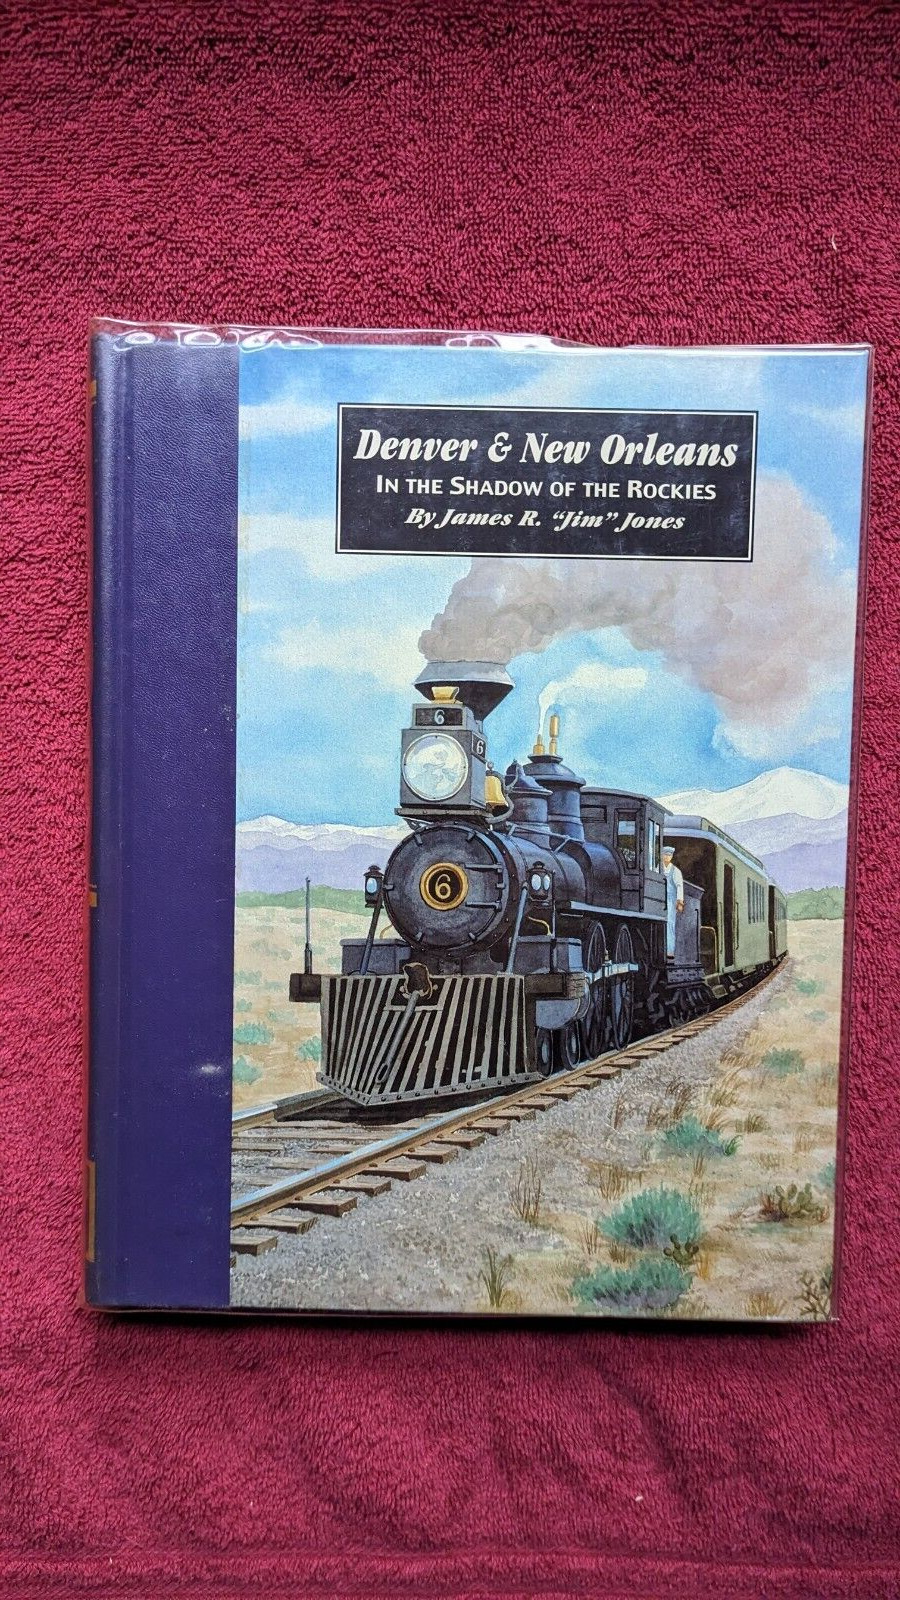 Denver & New Orleans: In the Shadow of the Rockies Signed and Numbered Hardcover